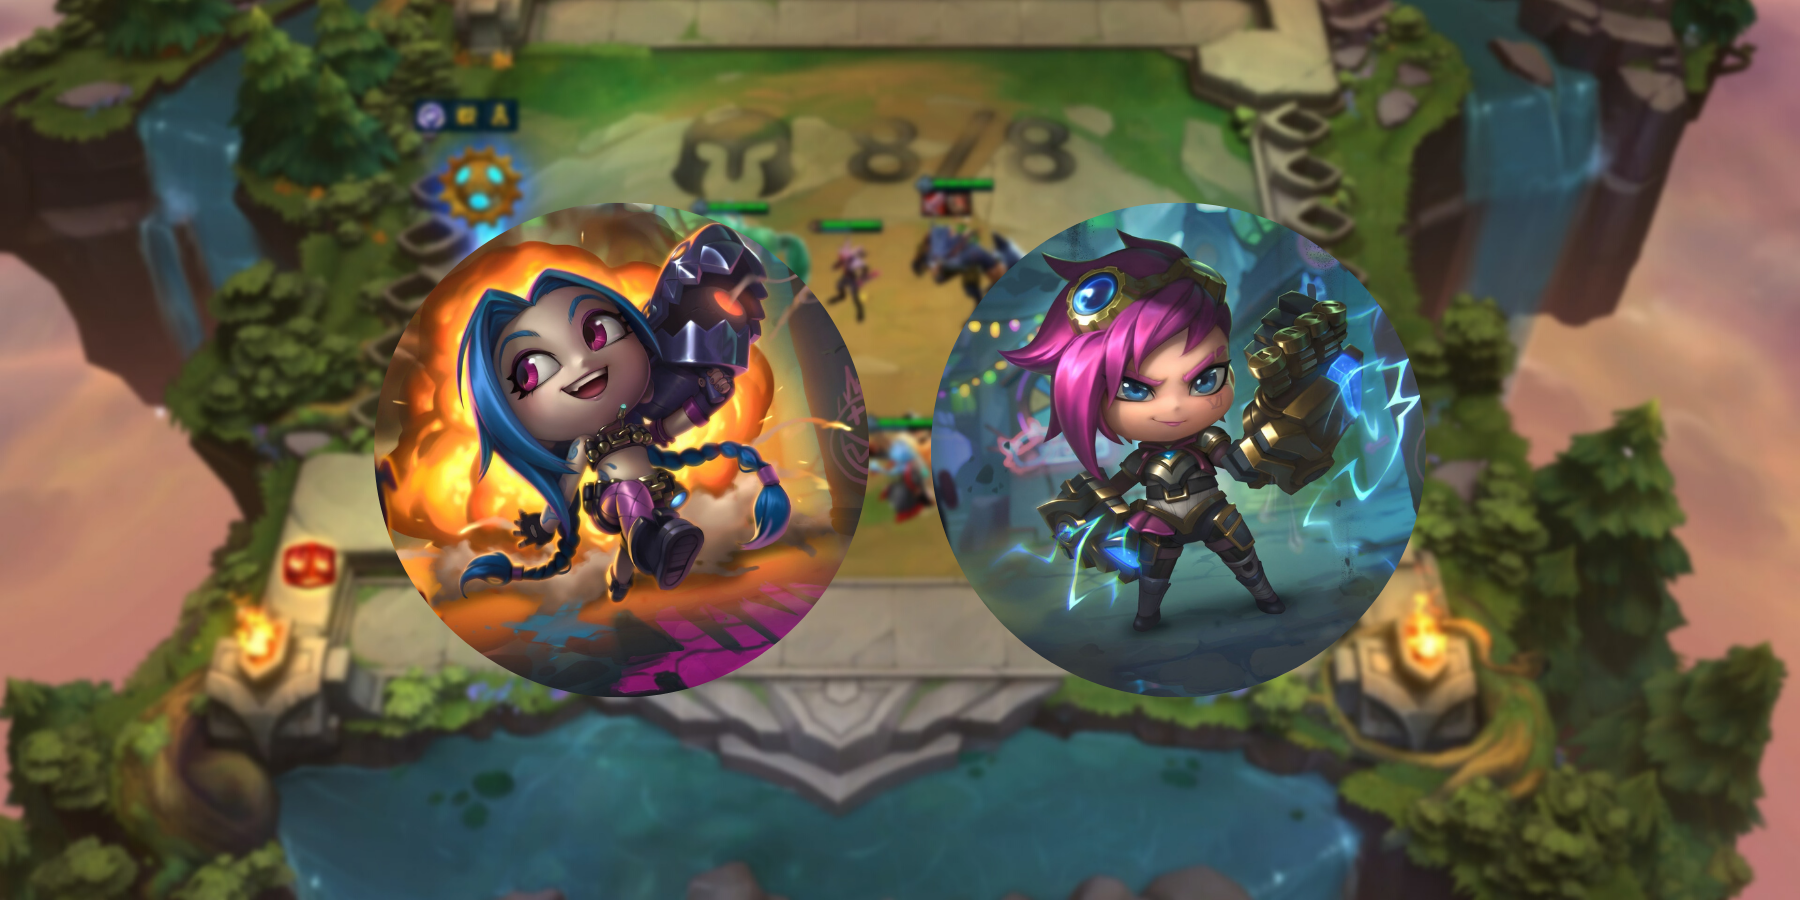 tft new tactician possibilities and skins